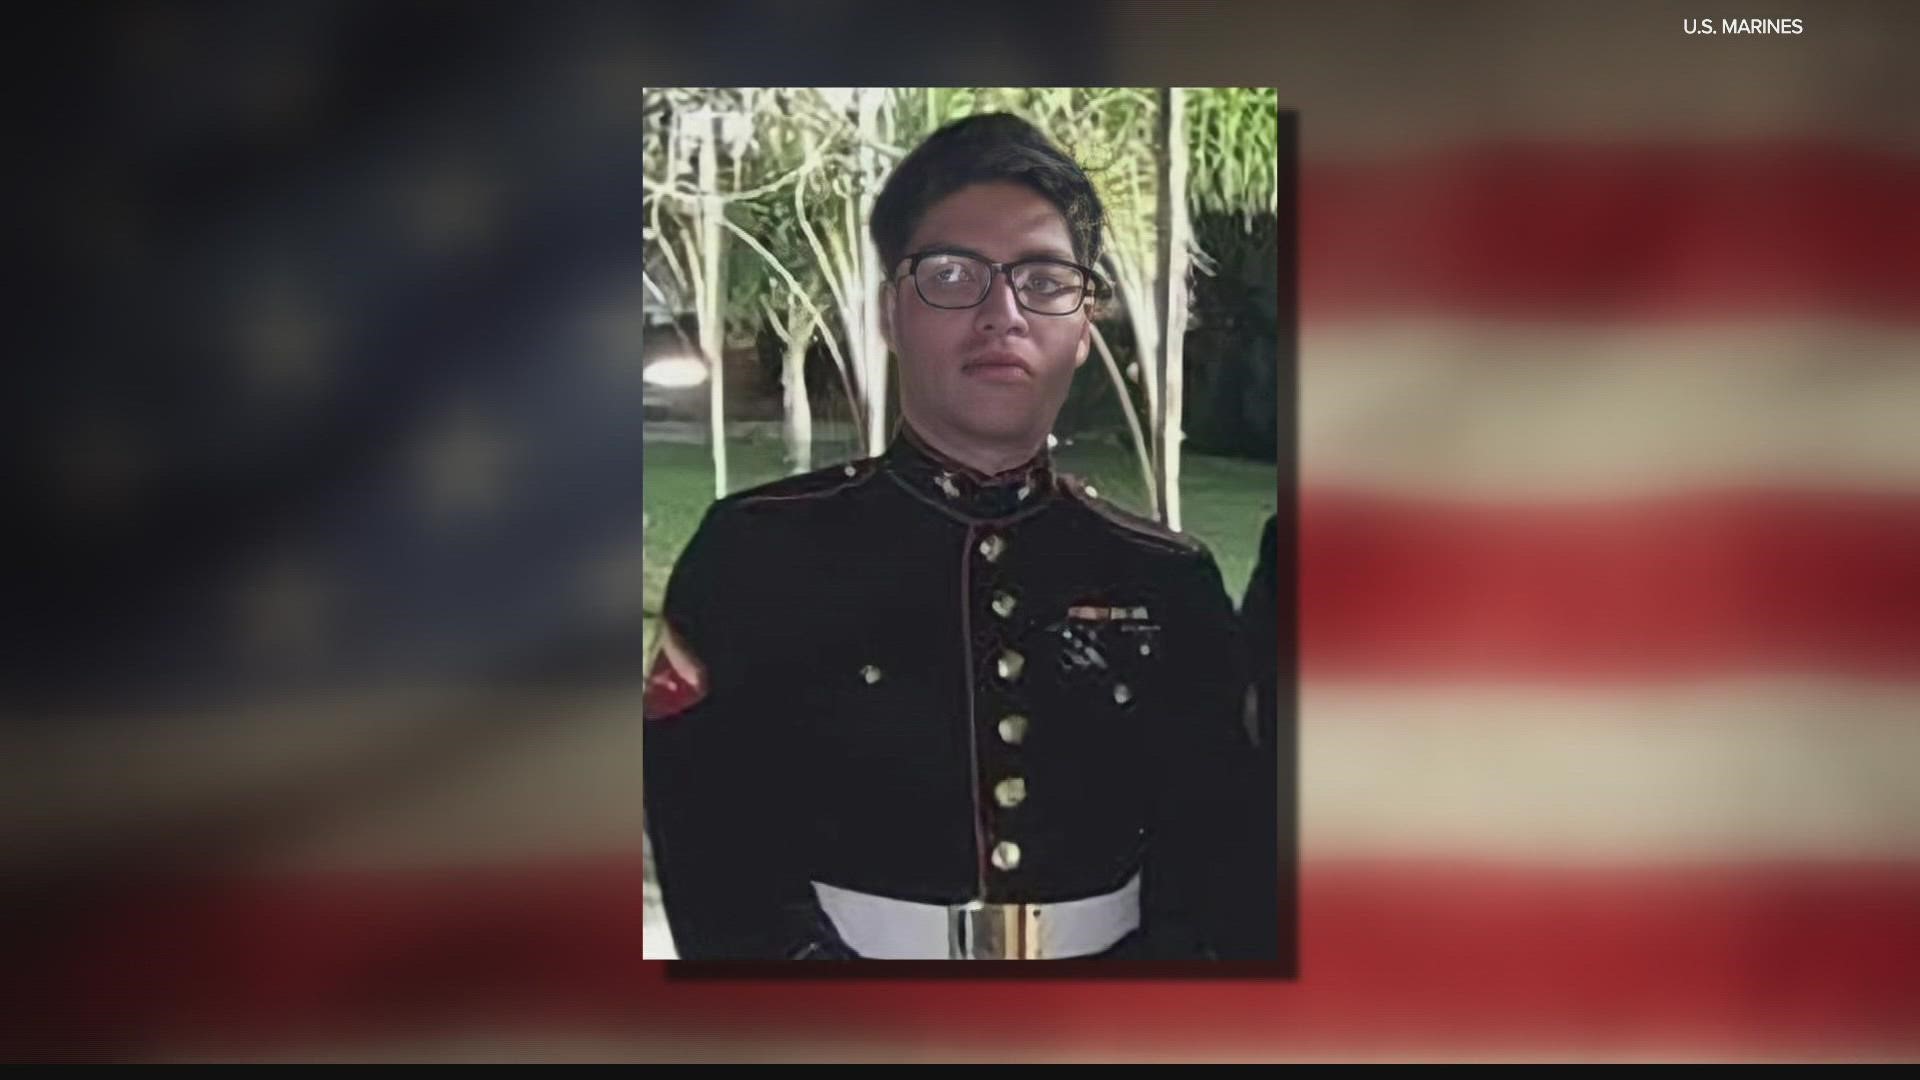 Cpl. Humberto Sanchez, a 2017 Logansport H.S. graduate, was one of 13 service members killed in attack at the Kabul airport.